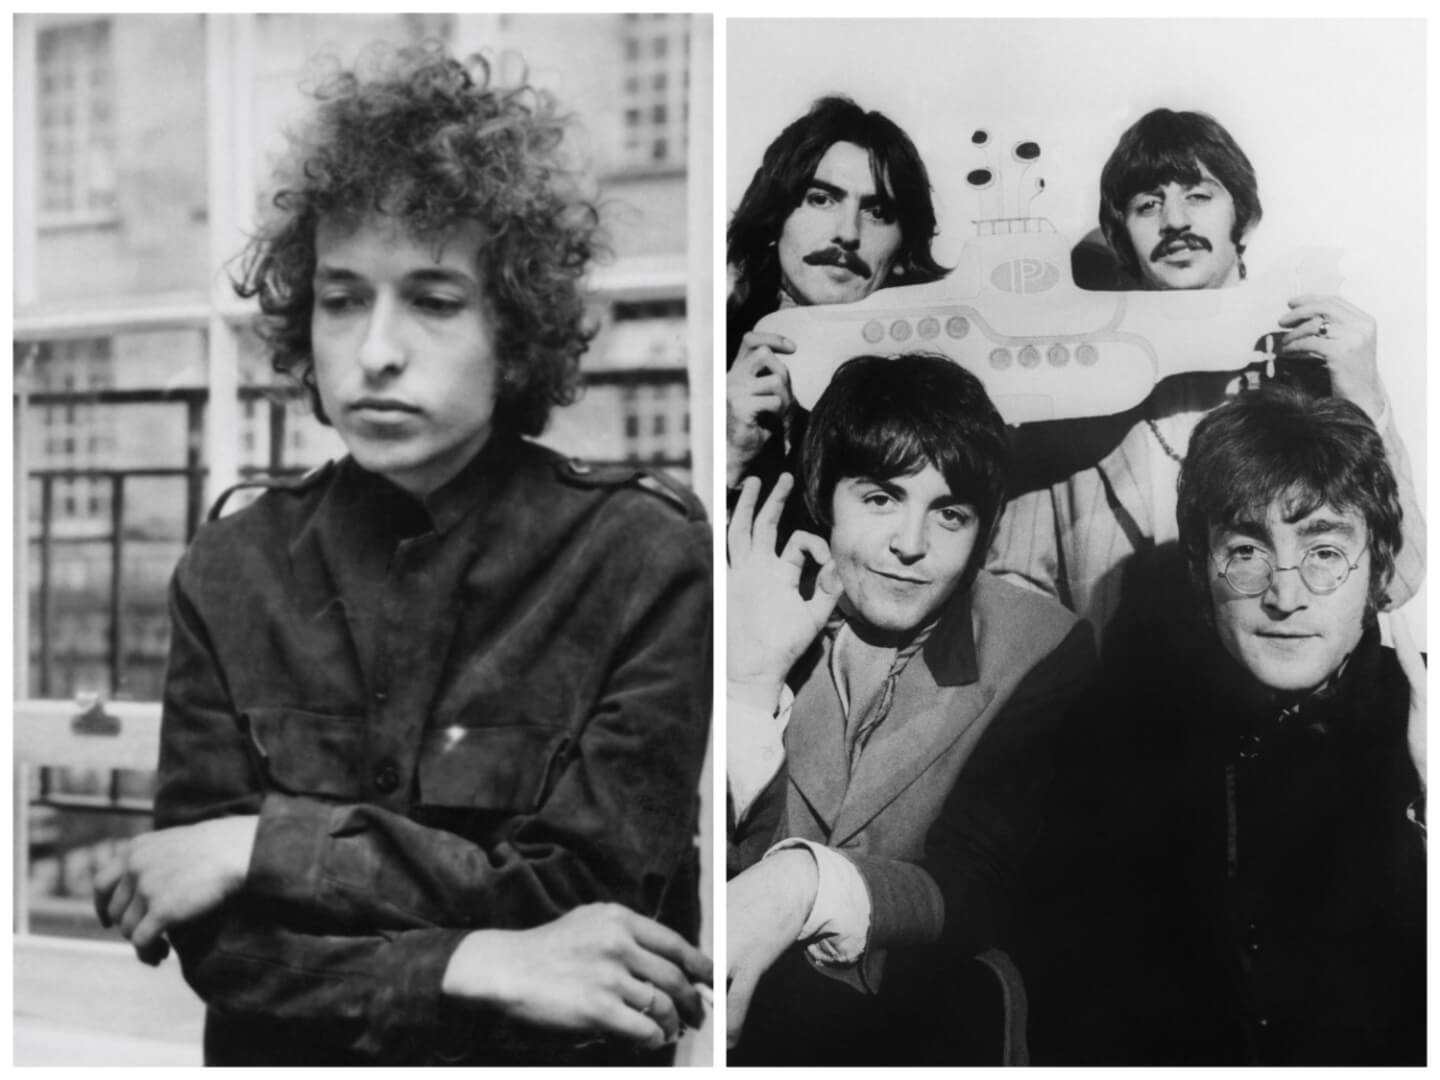 A black and white picture of Bob Dylan leaning against a window. The Beatles pose with a yellow submarine toy.